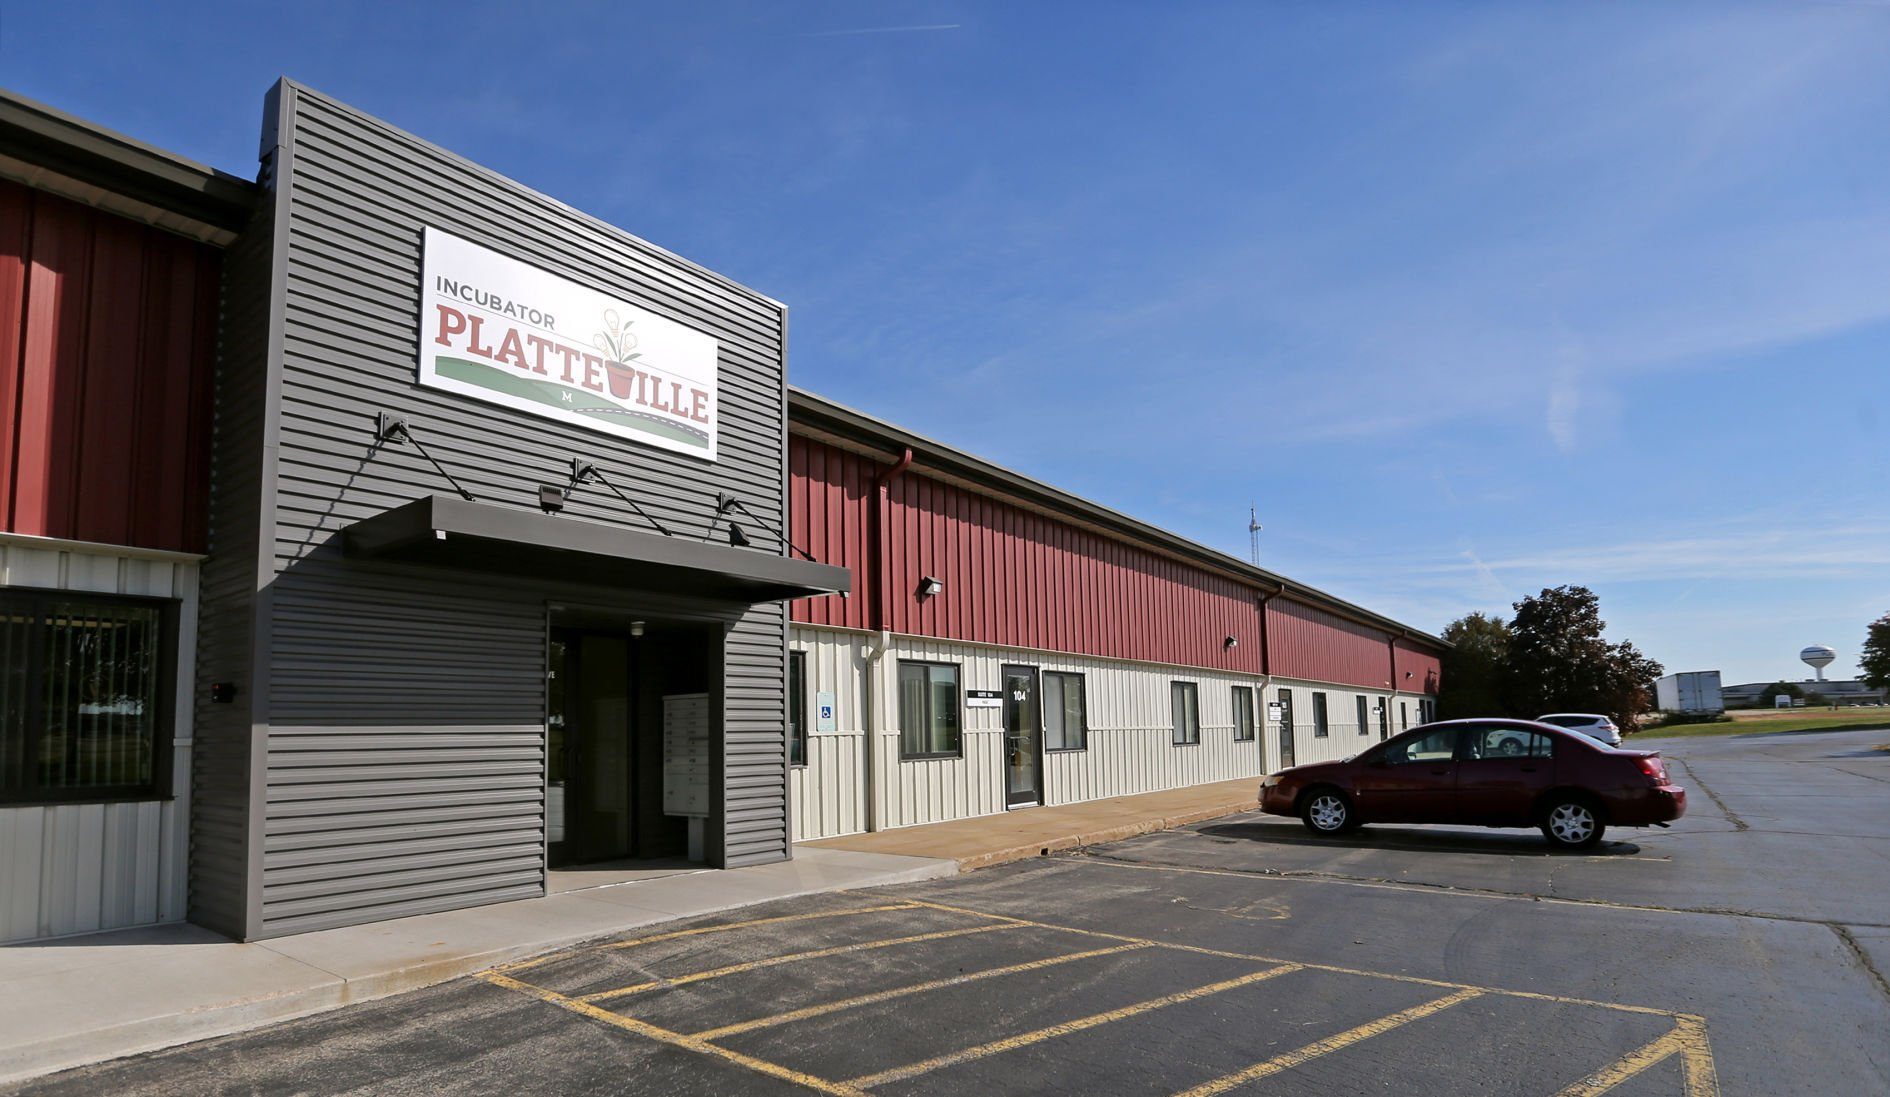 The Platteville Business Incubator in Platteville, Wis.    PHOTO CREDIT: JESSICA REILLY